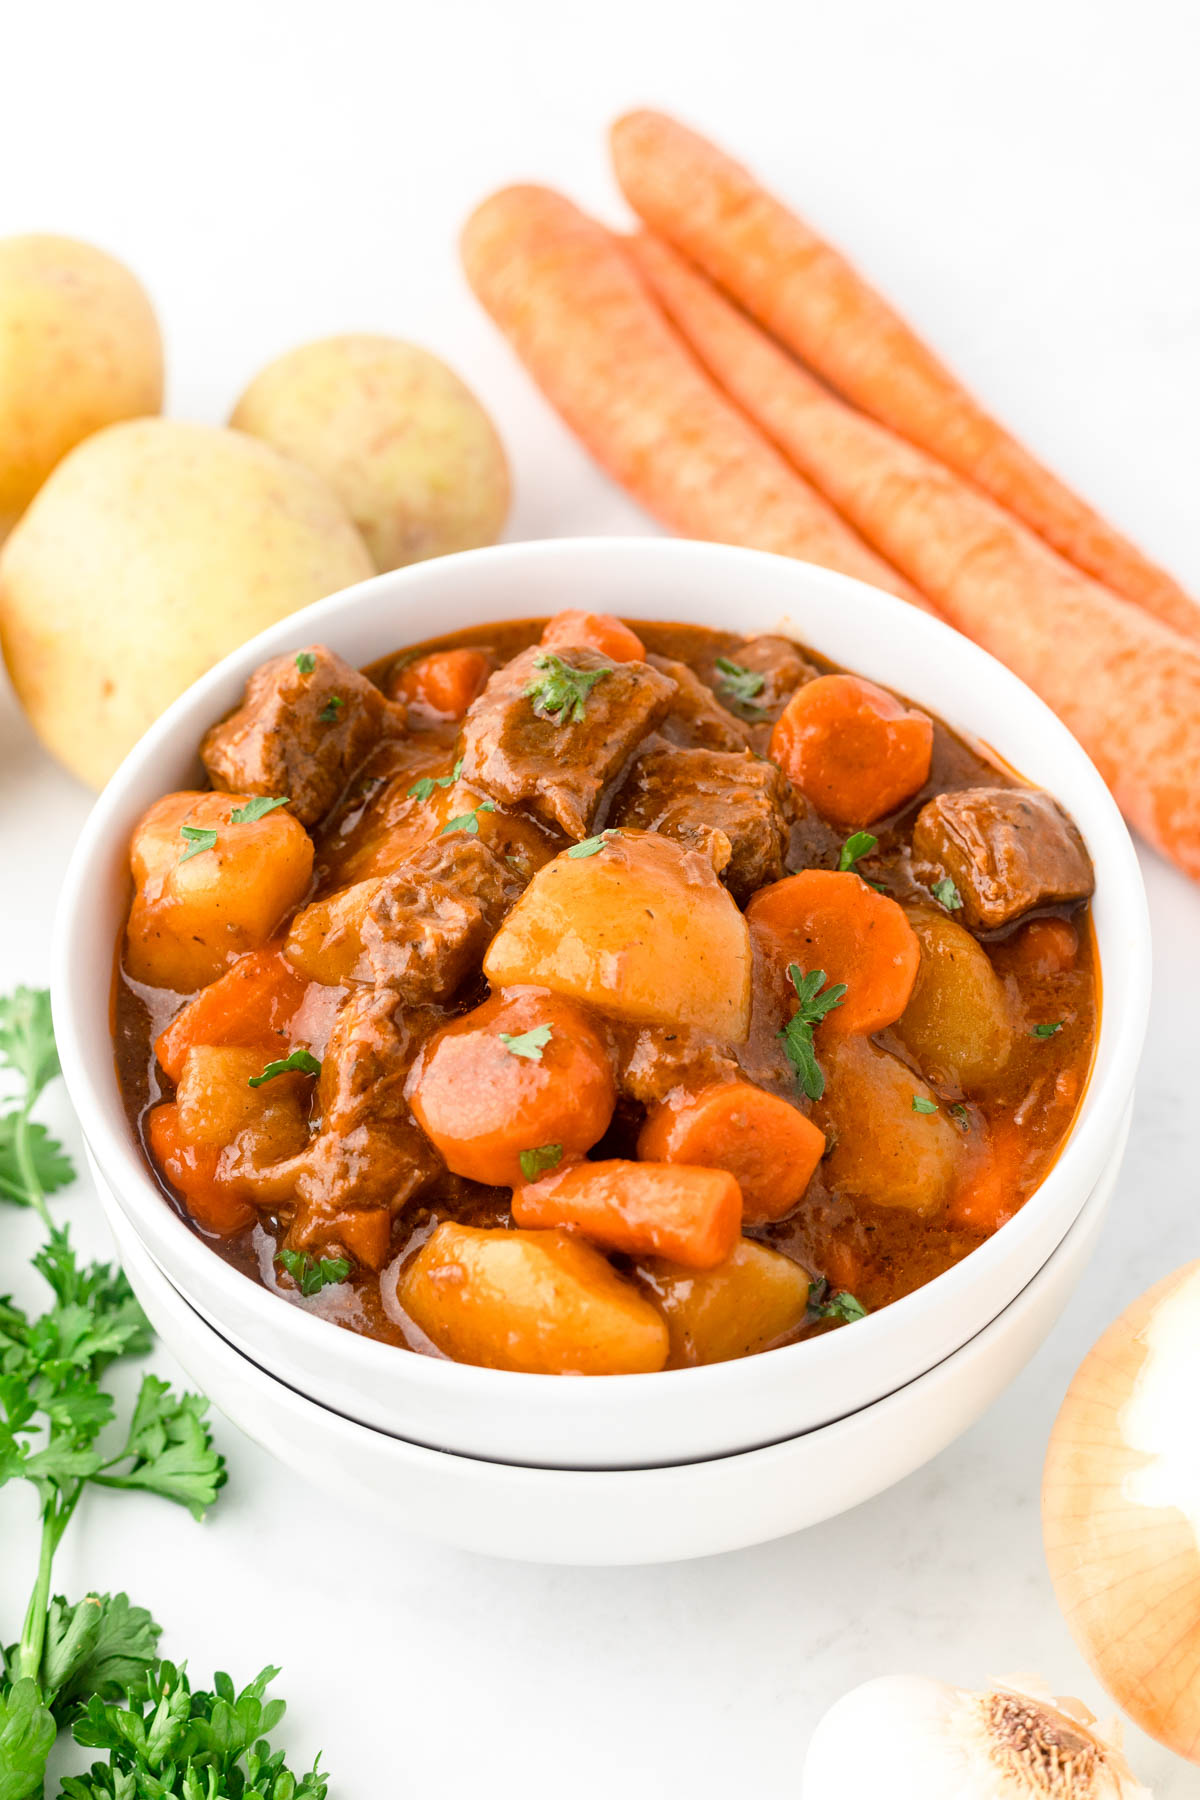 A bowl of beef stew next to vegetables.